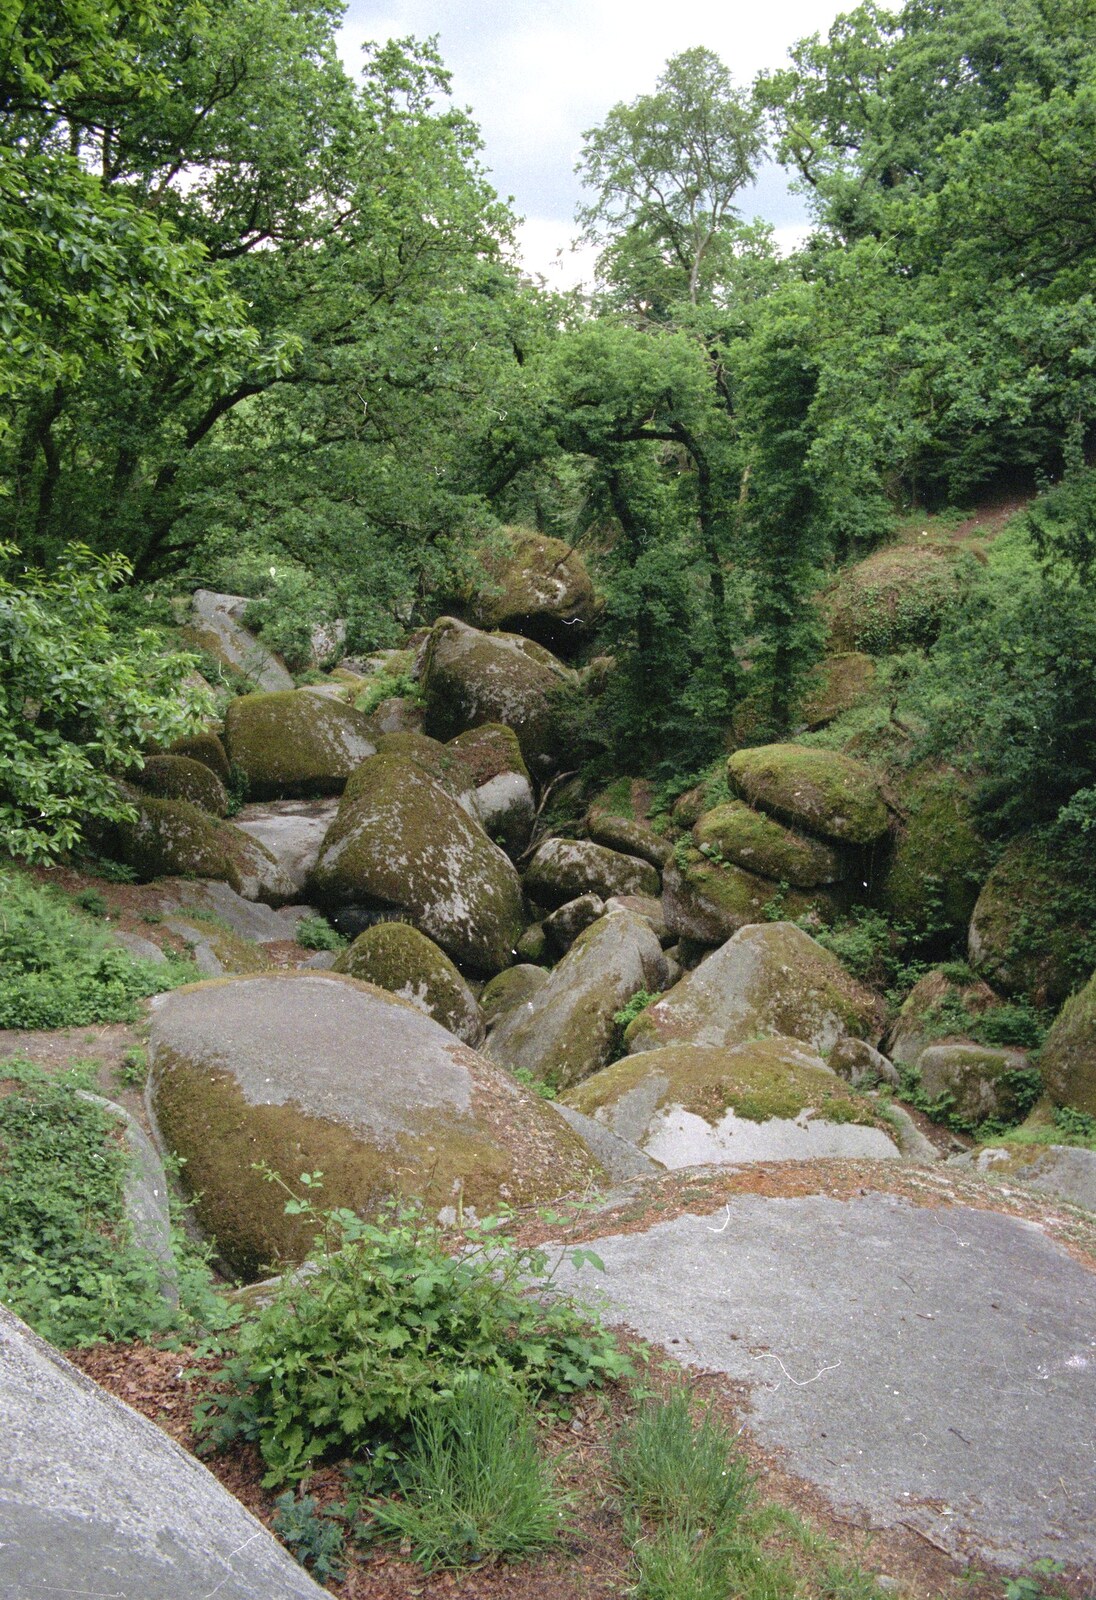 A Trip To Huelgoat, Brittany, France - 11th June 1990: A pile of rocks in Arthur's Forest